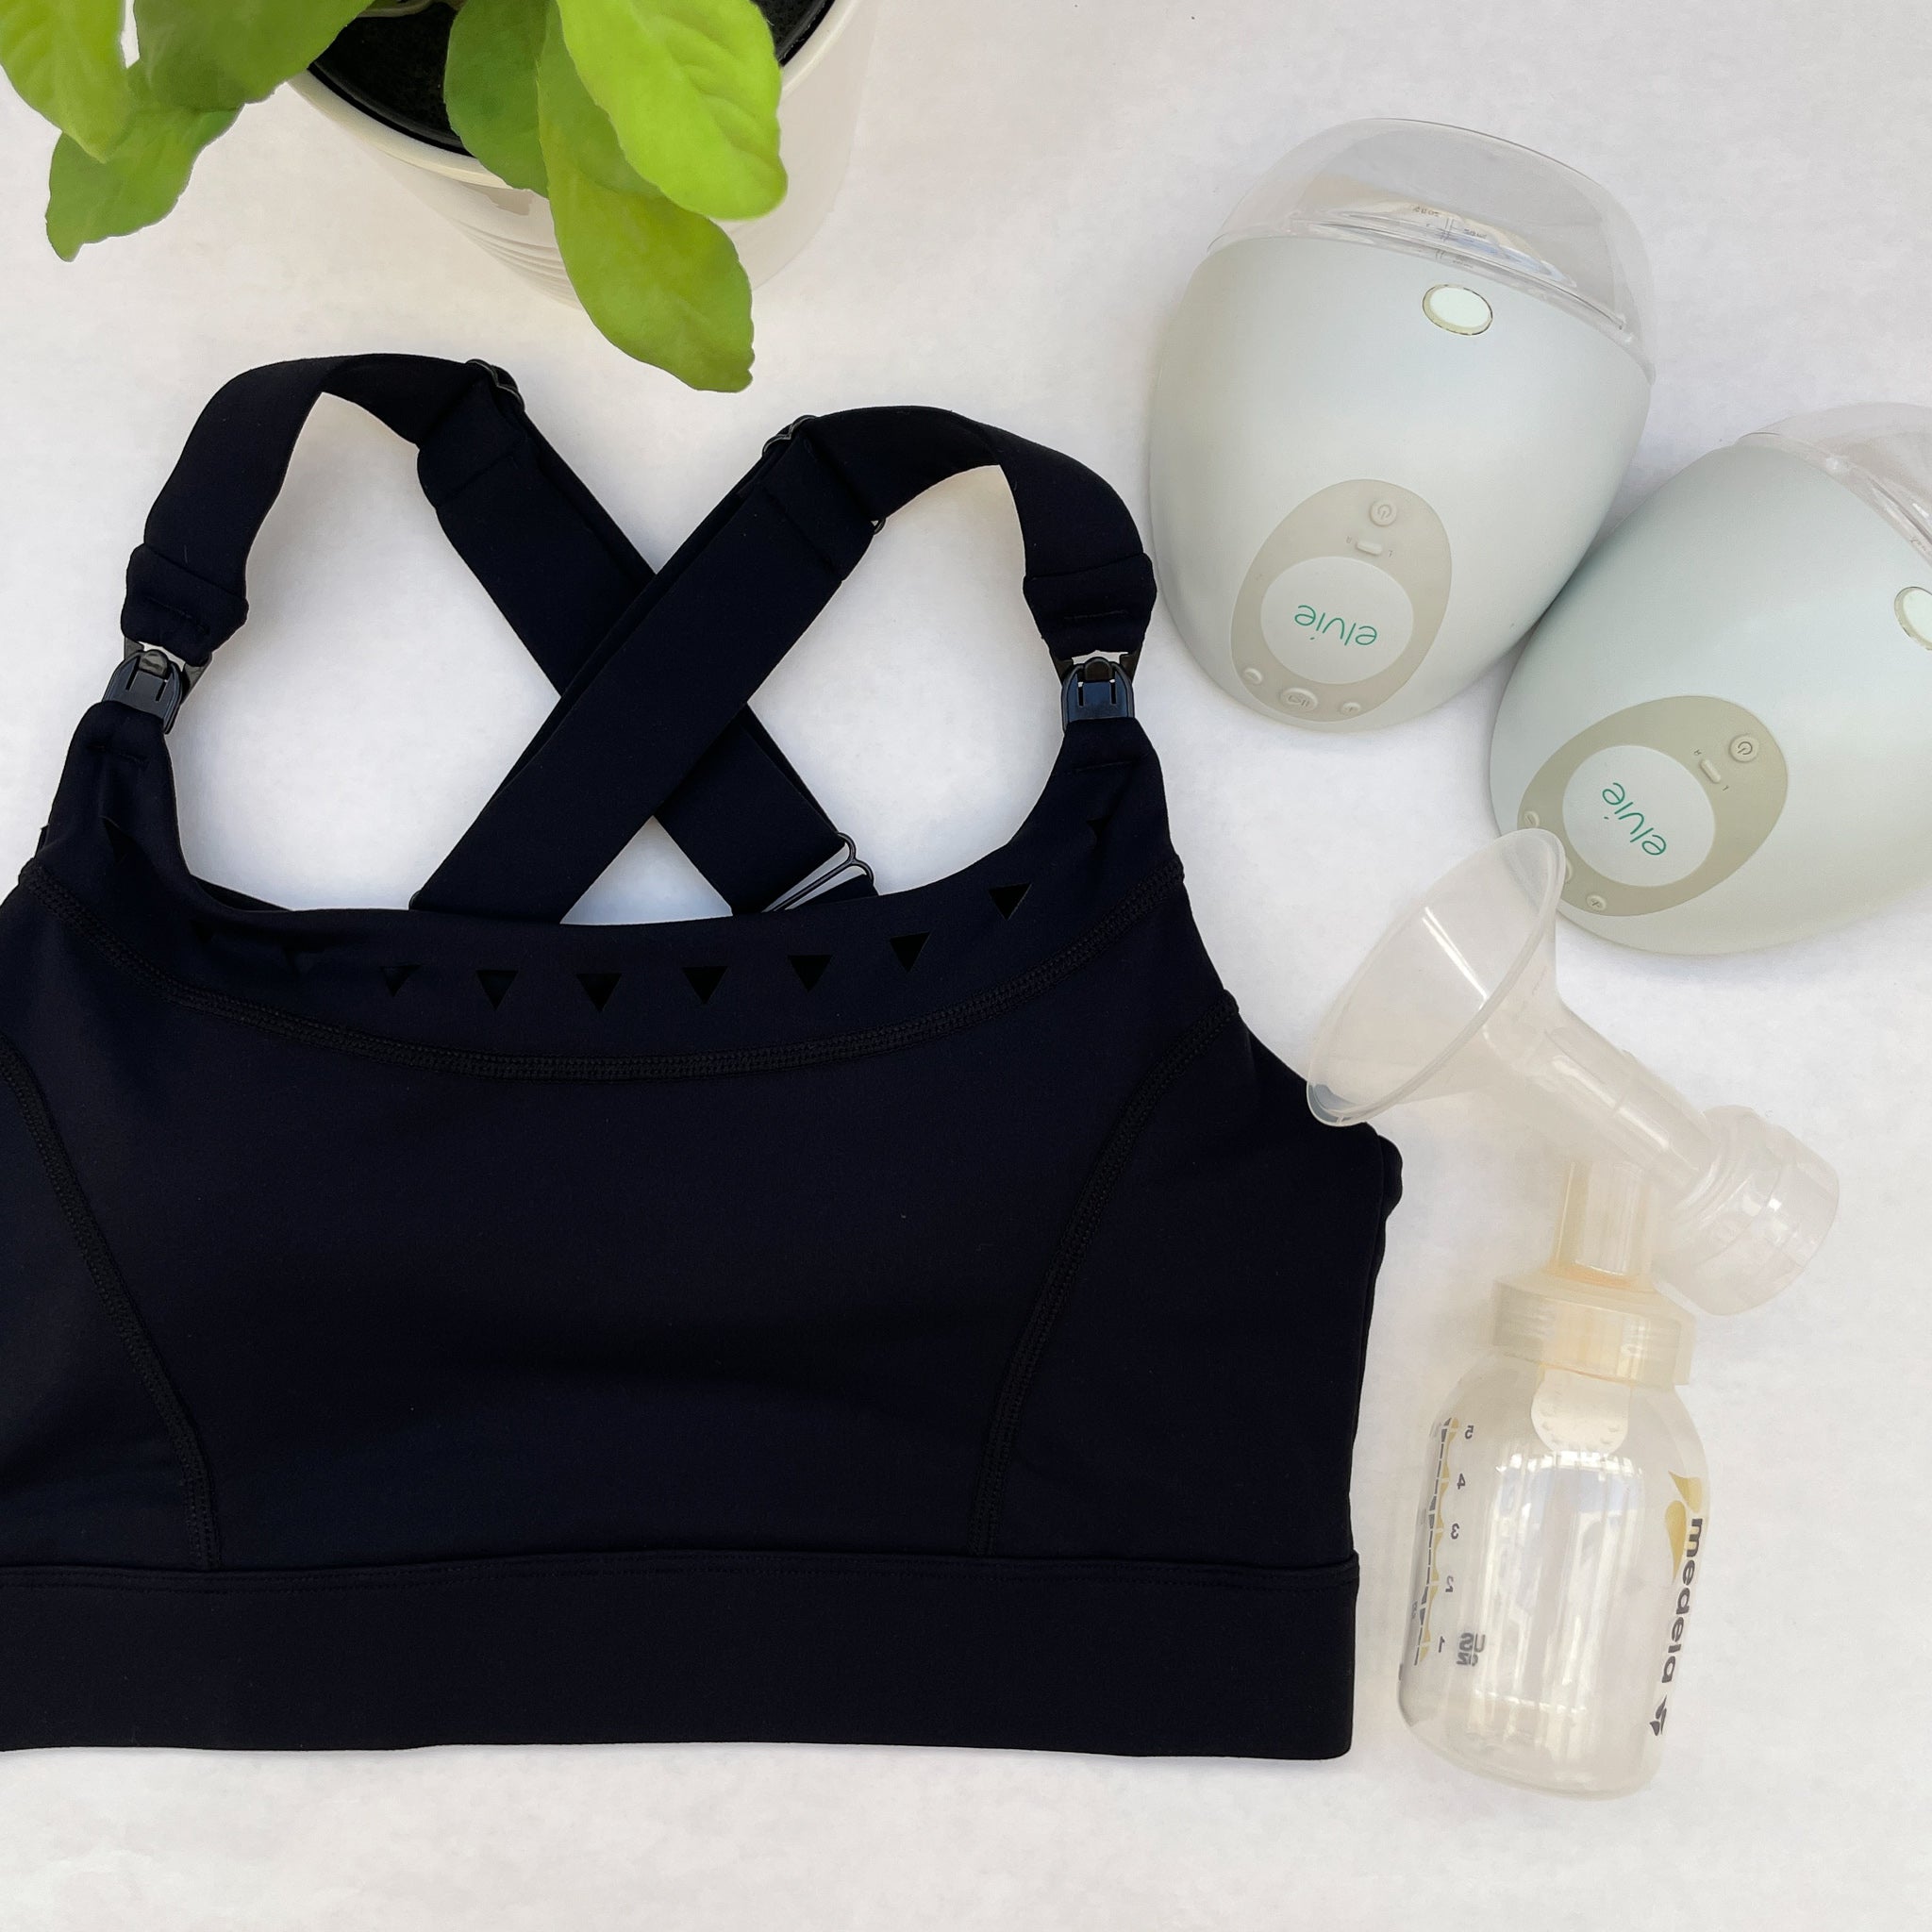 Best Maternity Workout Clothes - Sweat and Milk Venice 3 Ultimate Support  Full Coverage Nursing and Pumping Sports Bra - testing on a mountain –  iRunFar